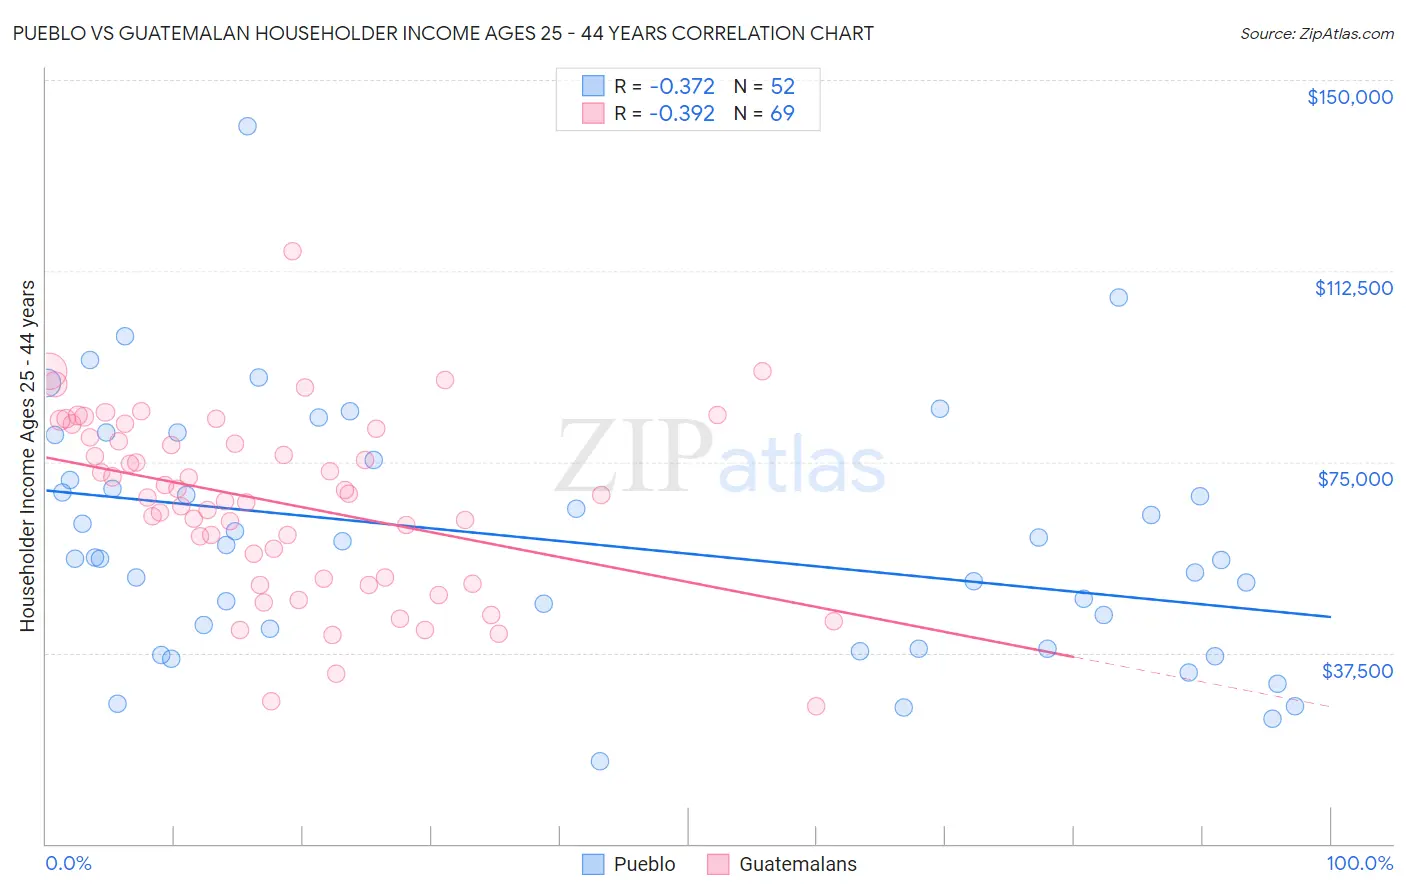 Pueblo vs Guatemalan Householder Income Ages 25 - 44 years